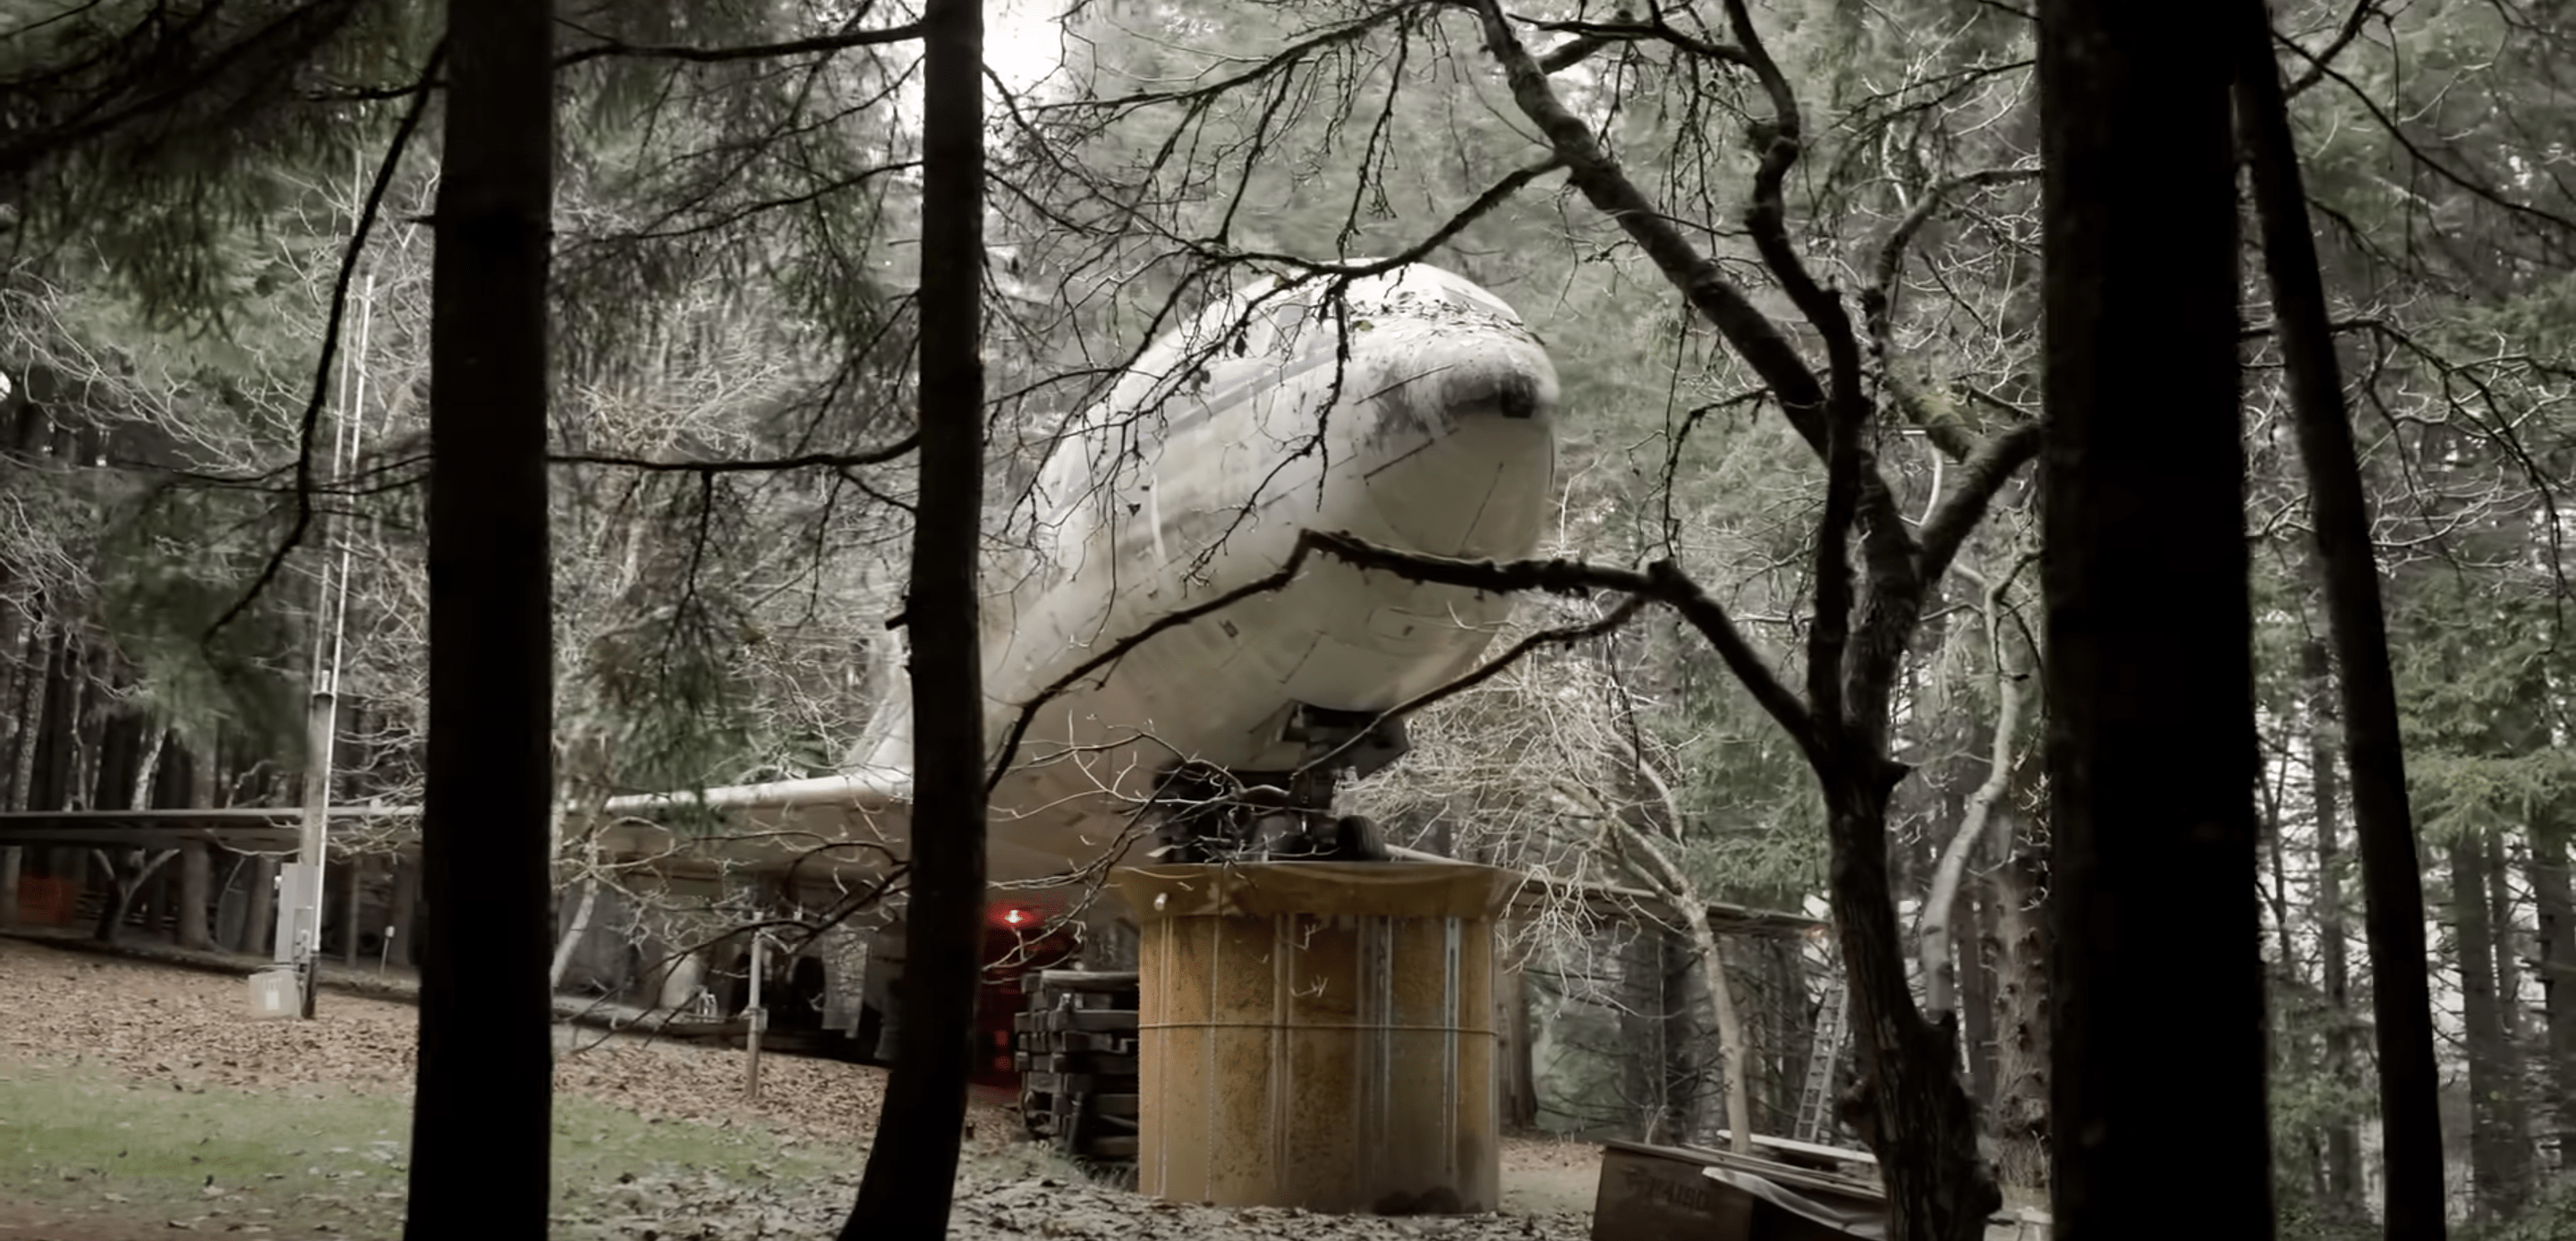 This Restored Boeing 727 Home Built By a 73-Year-Old Retired Engineer Rocks